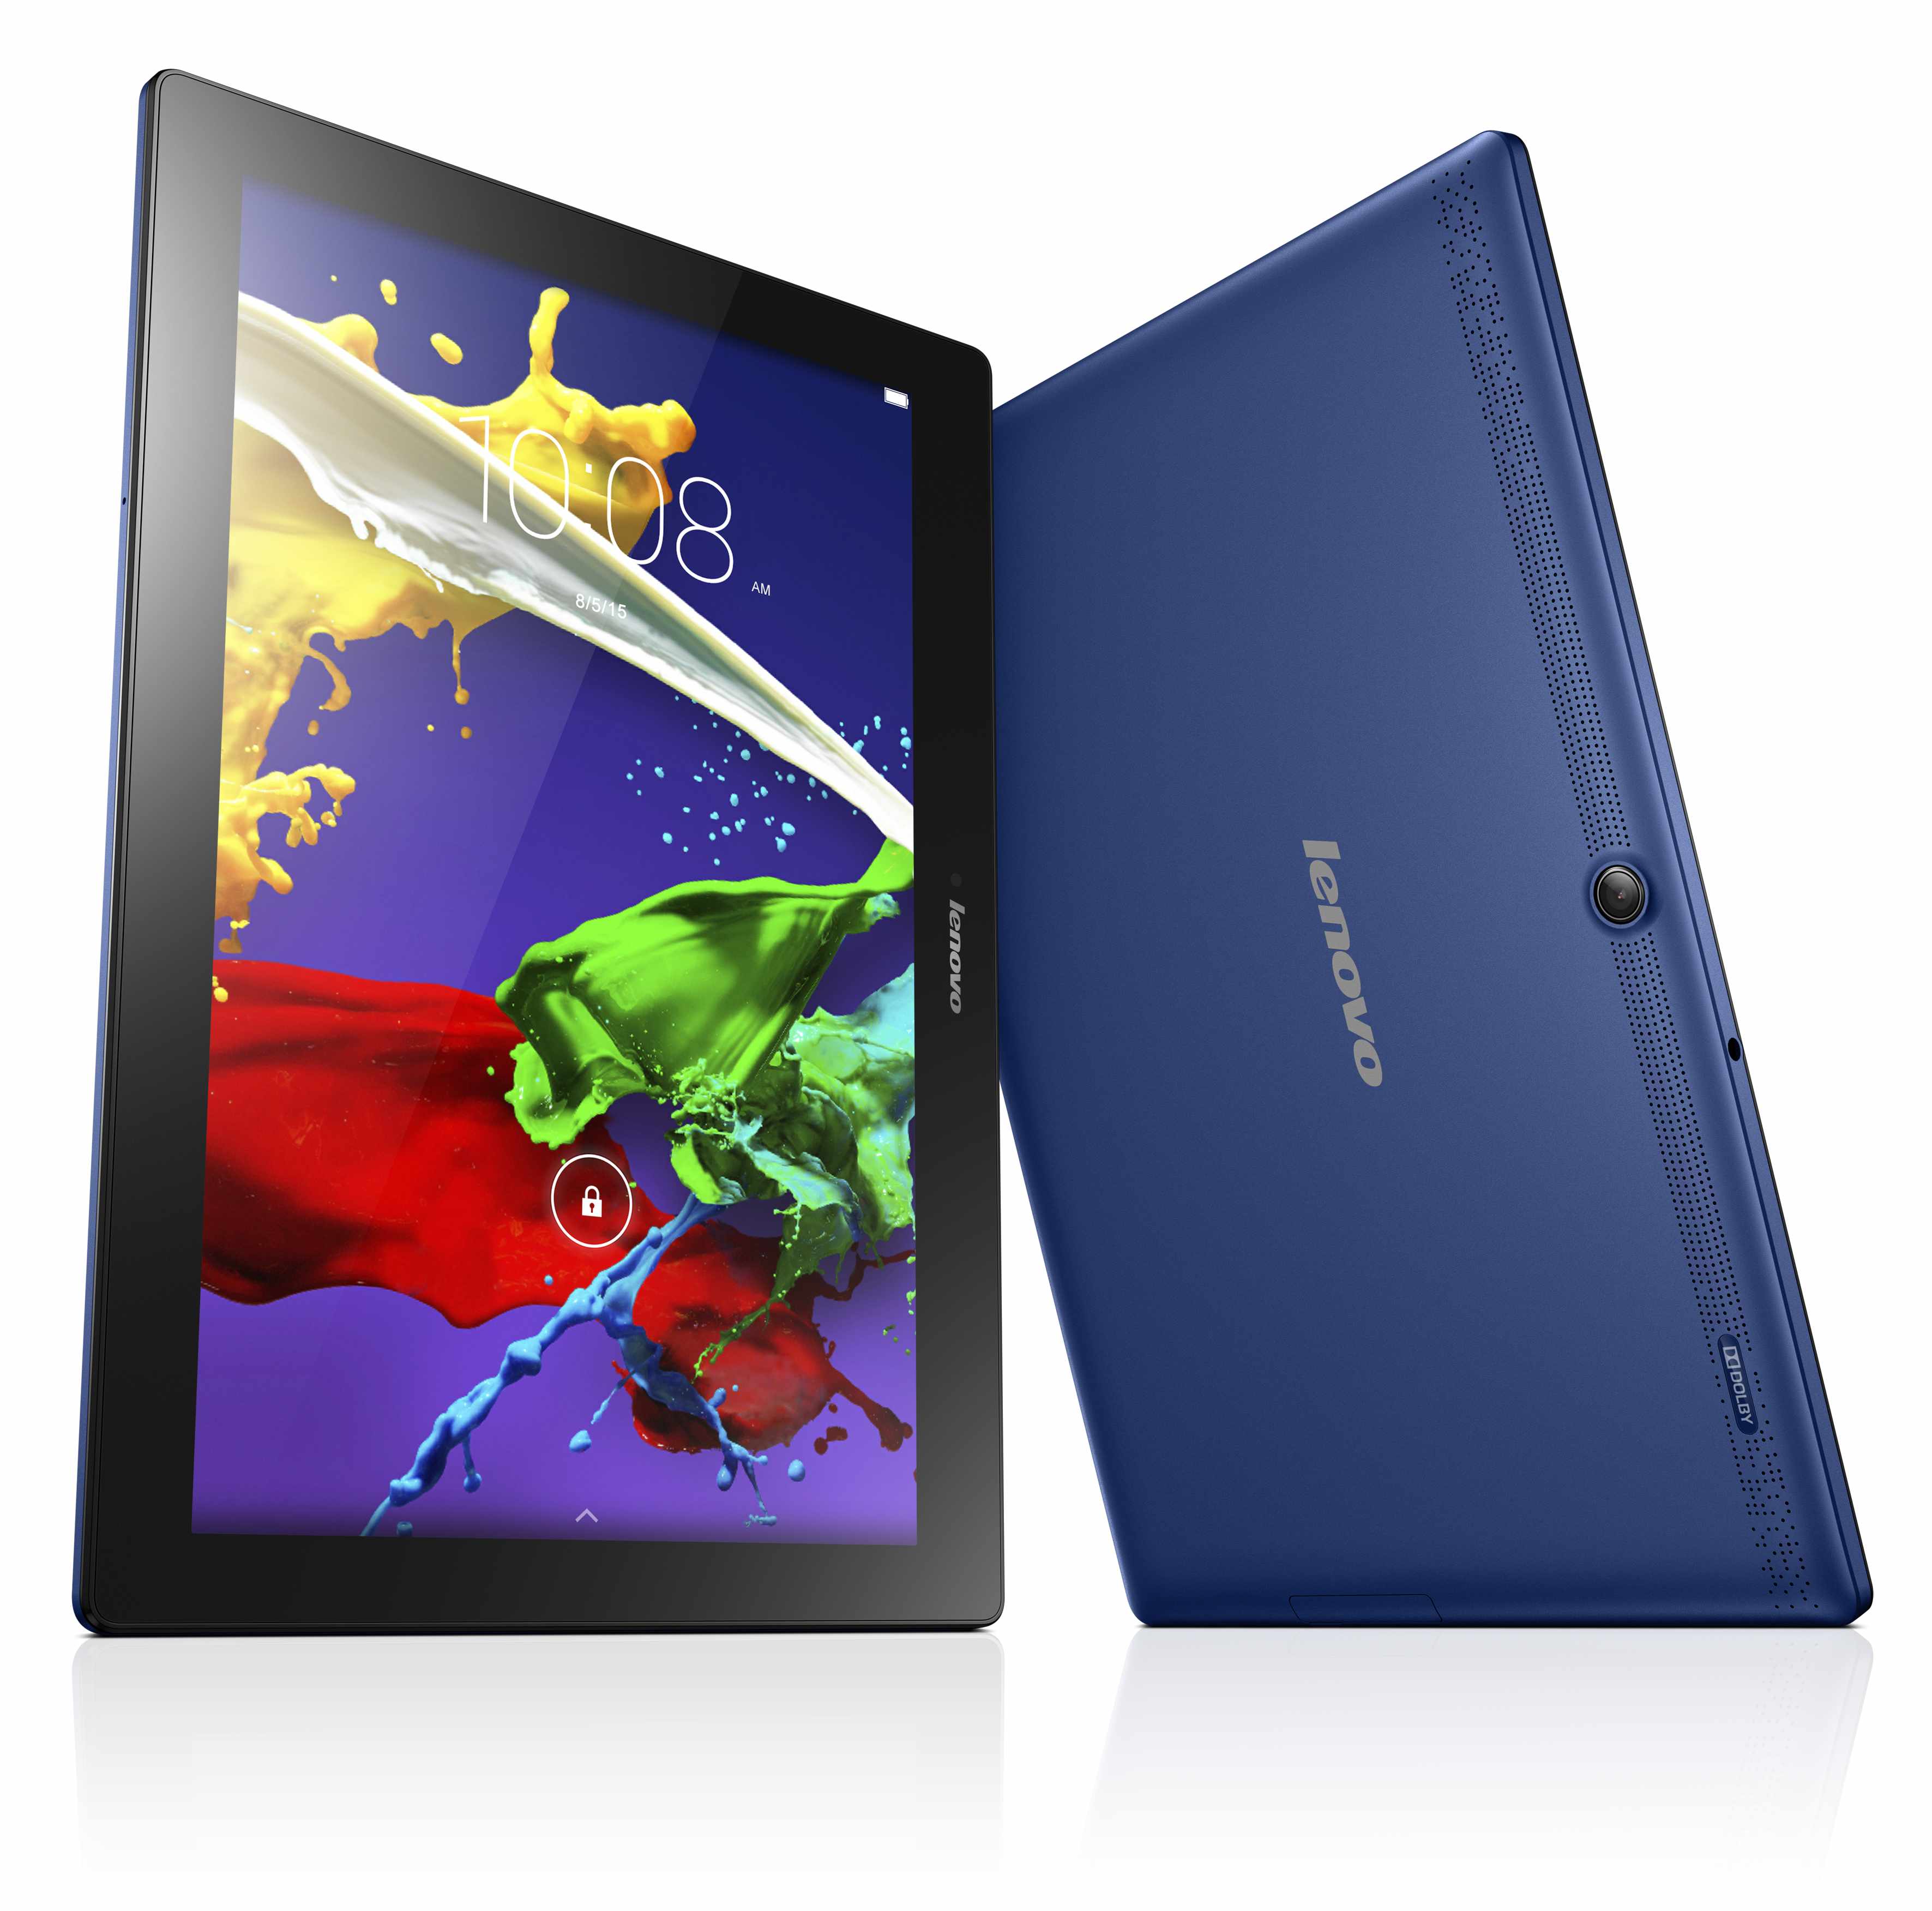 Lenovo announces new Android and Windows tablets at MWC 2015